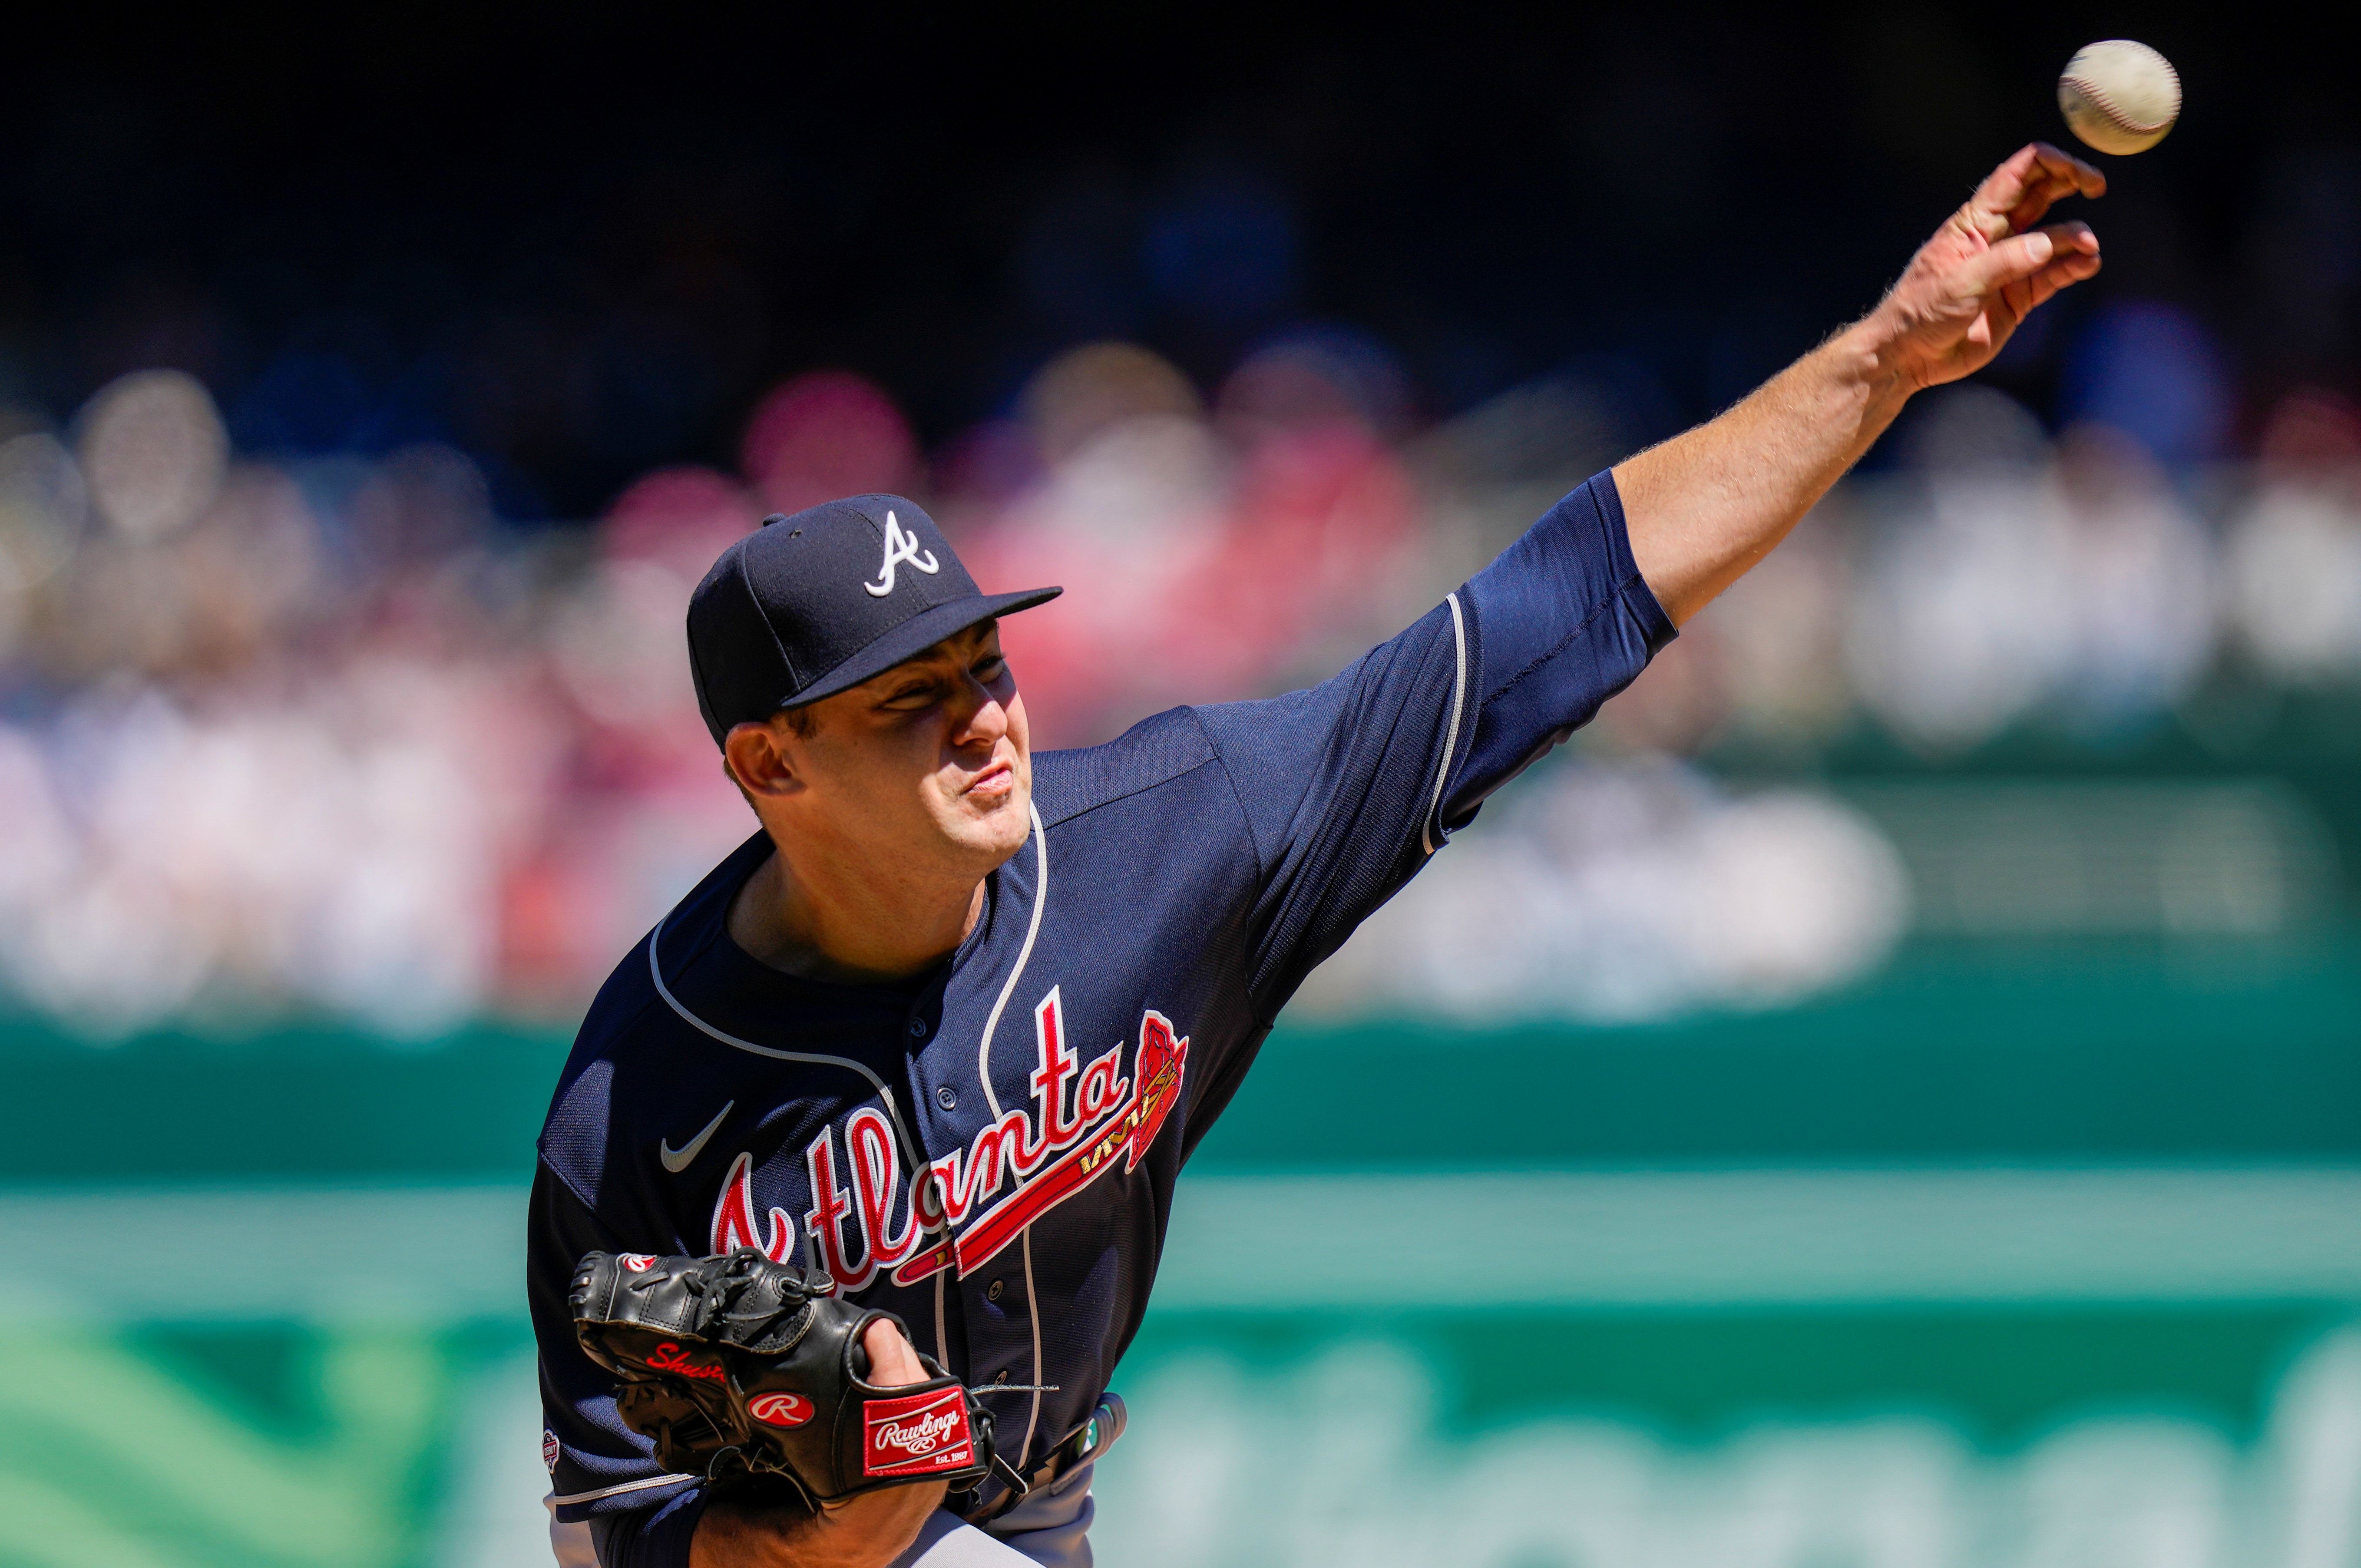 Mom is watching': How Braves pitcher Jared Shuster overcame